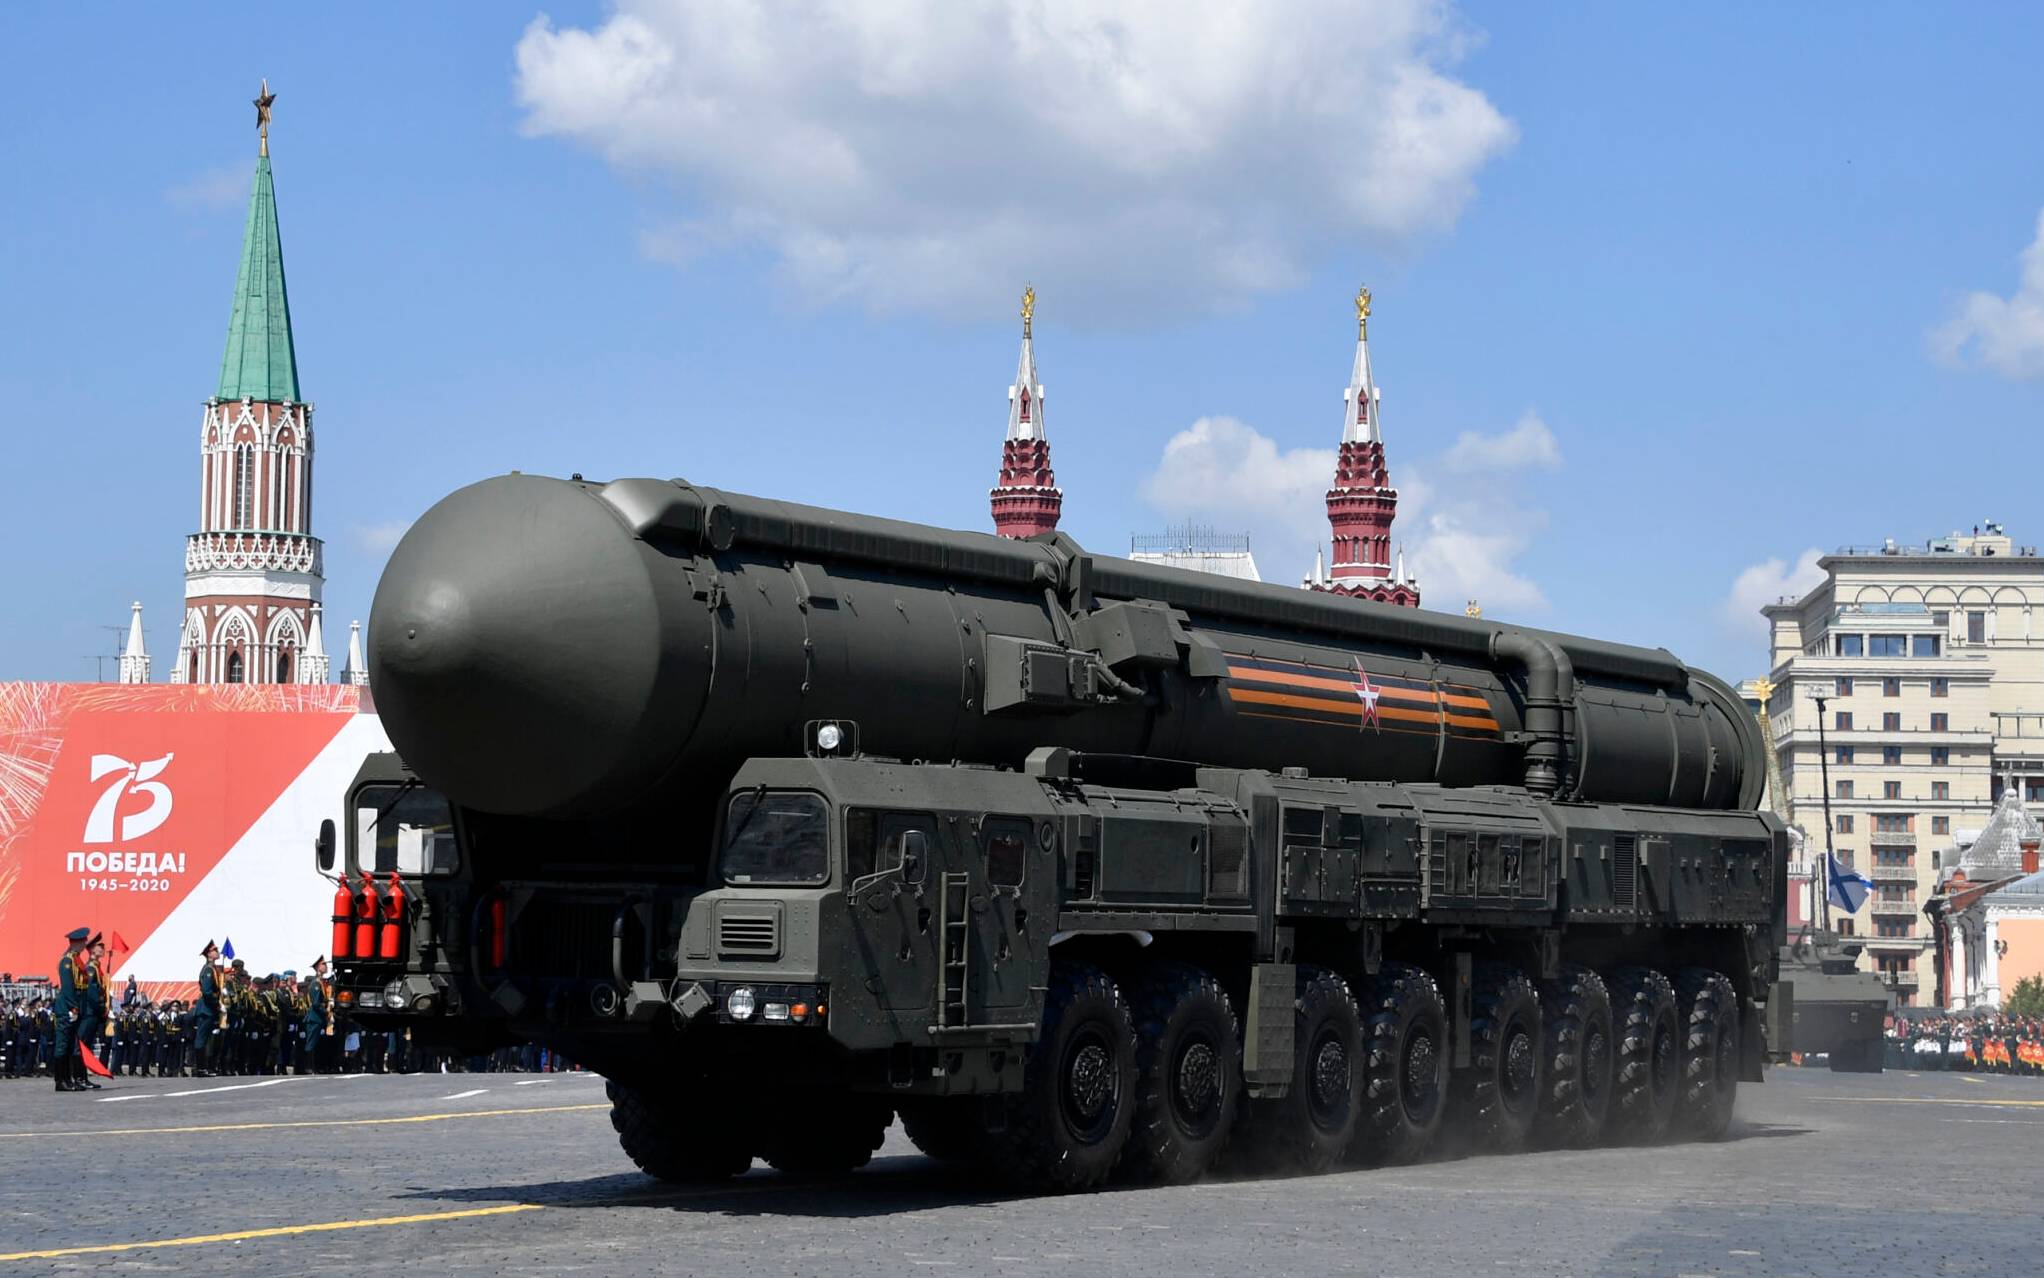 A Russian Yars RS-24 intercontinental ballistic missile system moves through Red Square during a military parade, which marks the 75th anniversary of the Soviet victory over Nazi Germany in World War Two, in Moscow on June 24, 2020. - The parade, usually held on May 9, was postponed this year because of the coronavirus pandemic. (Photo by Alexander NEMENOV / AFP)